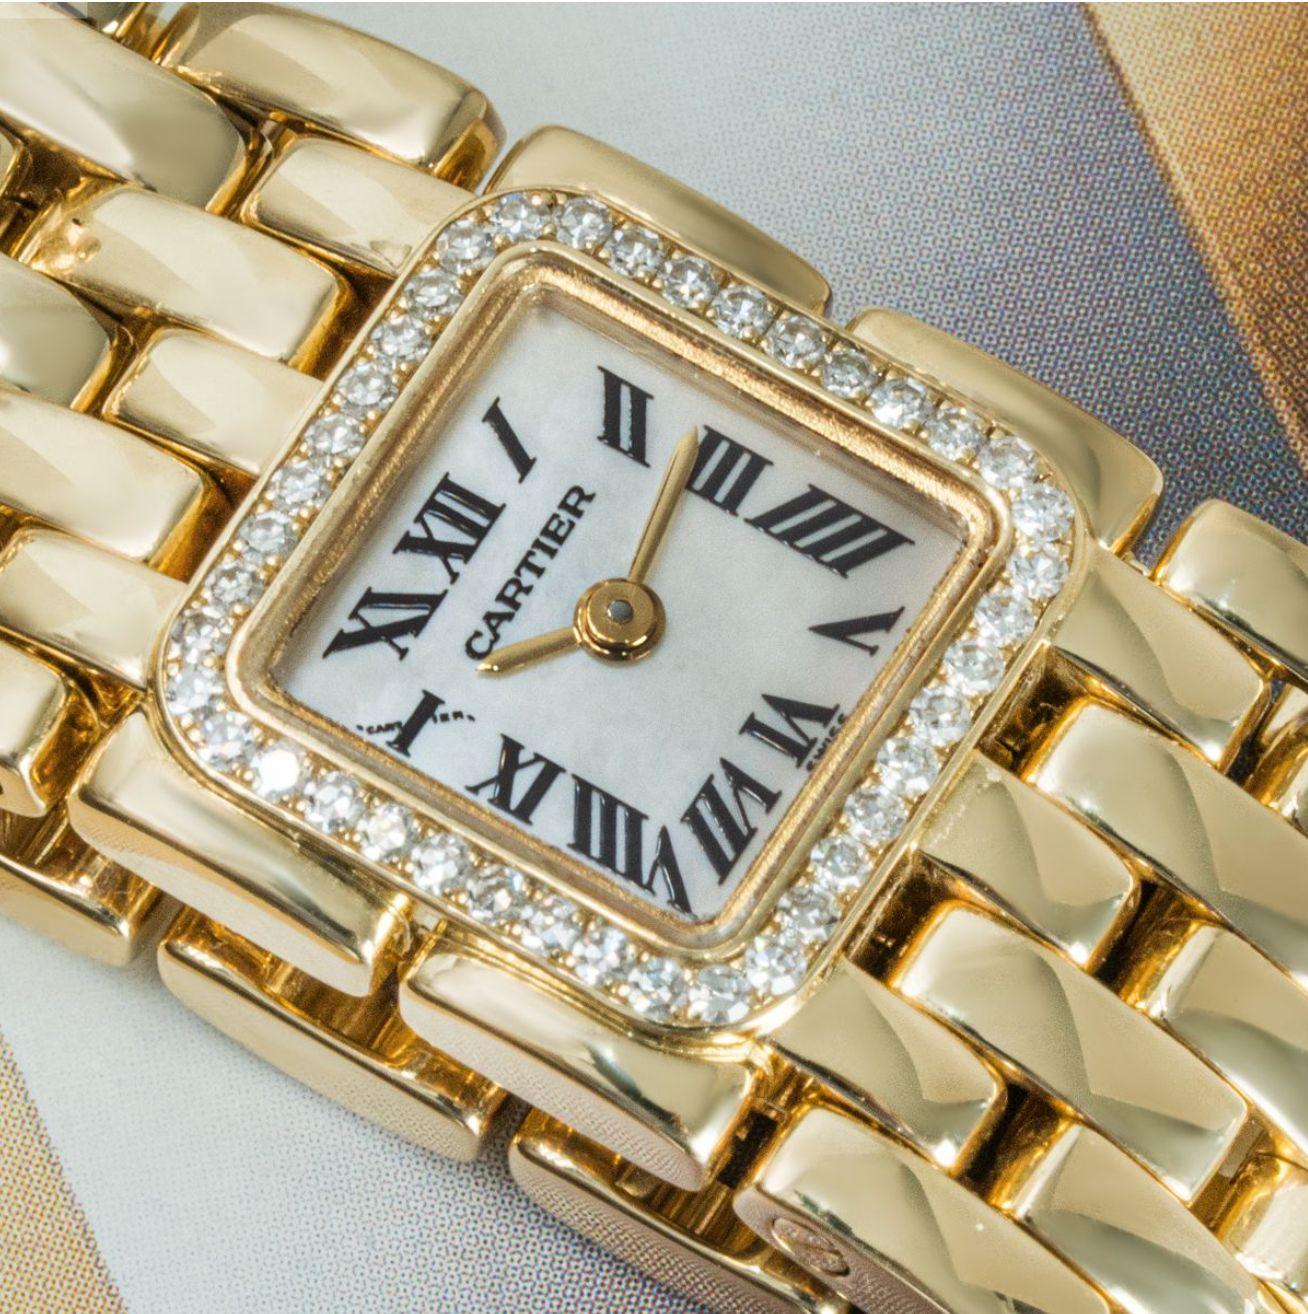 A yellow gold ladies Panthere Ruban by Cartier. Featuring a mother of pearl dial with roman numerals and a yellow gold bezel set with 40 single-cut diamonds weighing approximately 0.20ct. Fitted with a sapphire glass, a quartz movement and a yellow